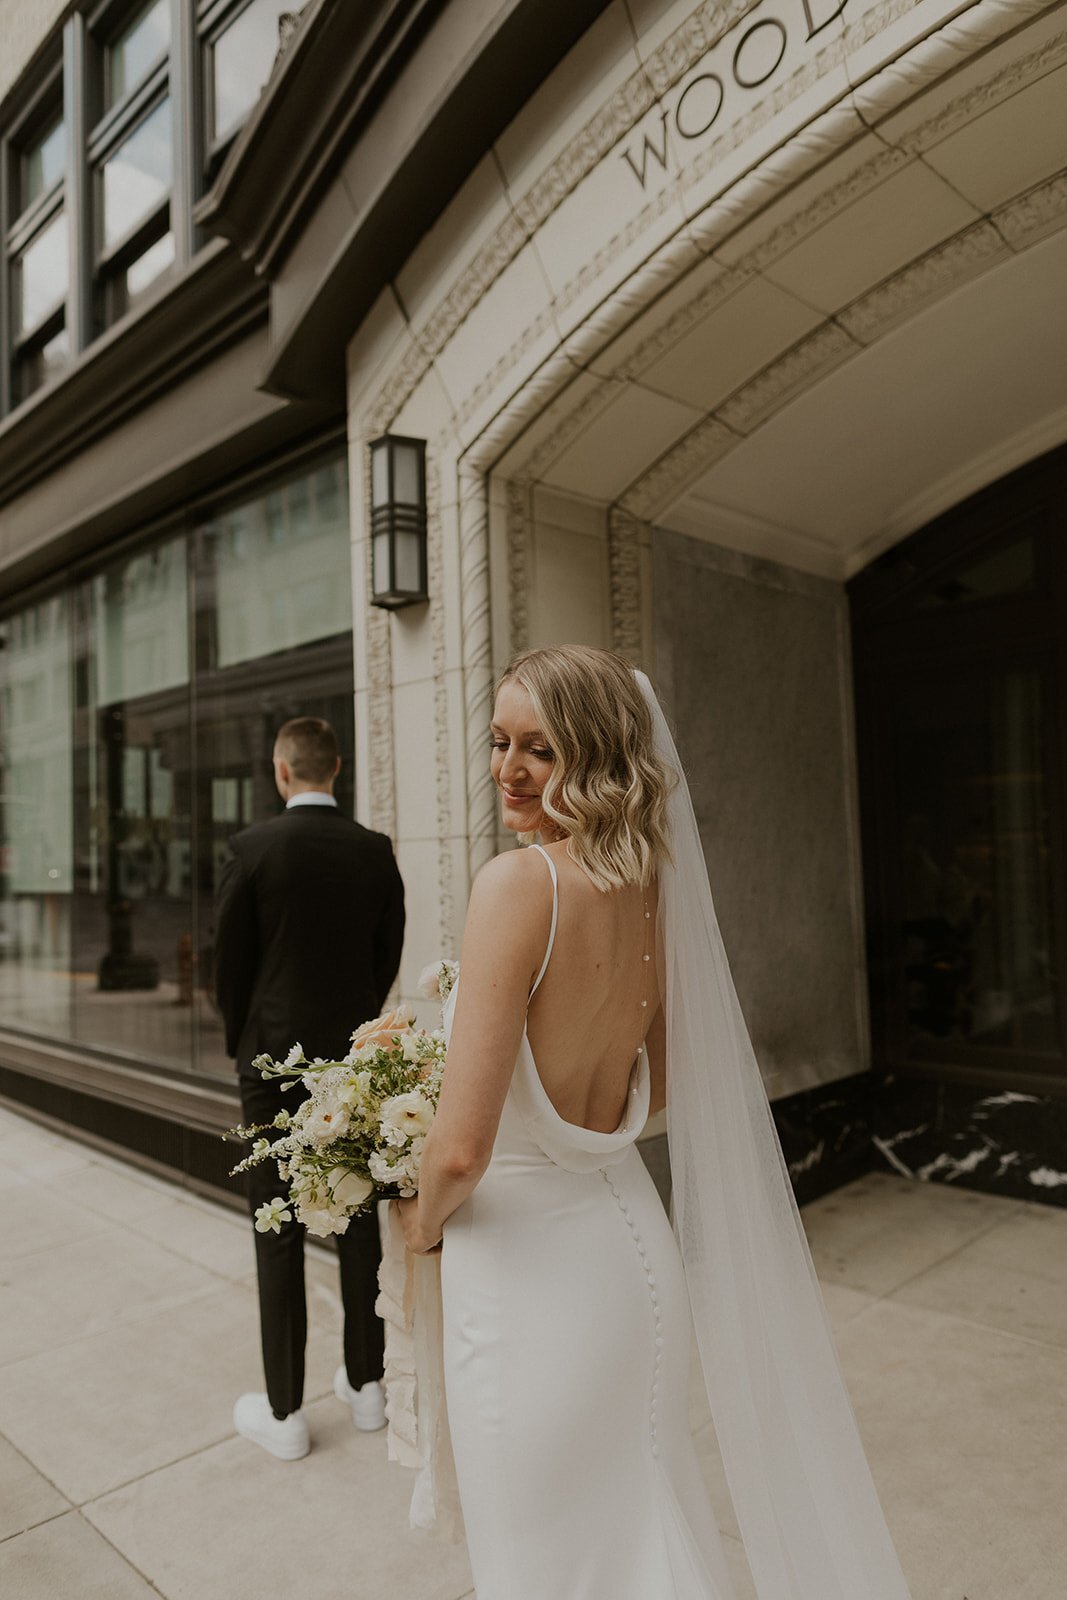 11 sophisticated, minimalist wedding dresses from Mikaella - Today's Bride